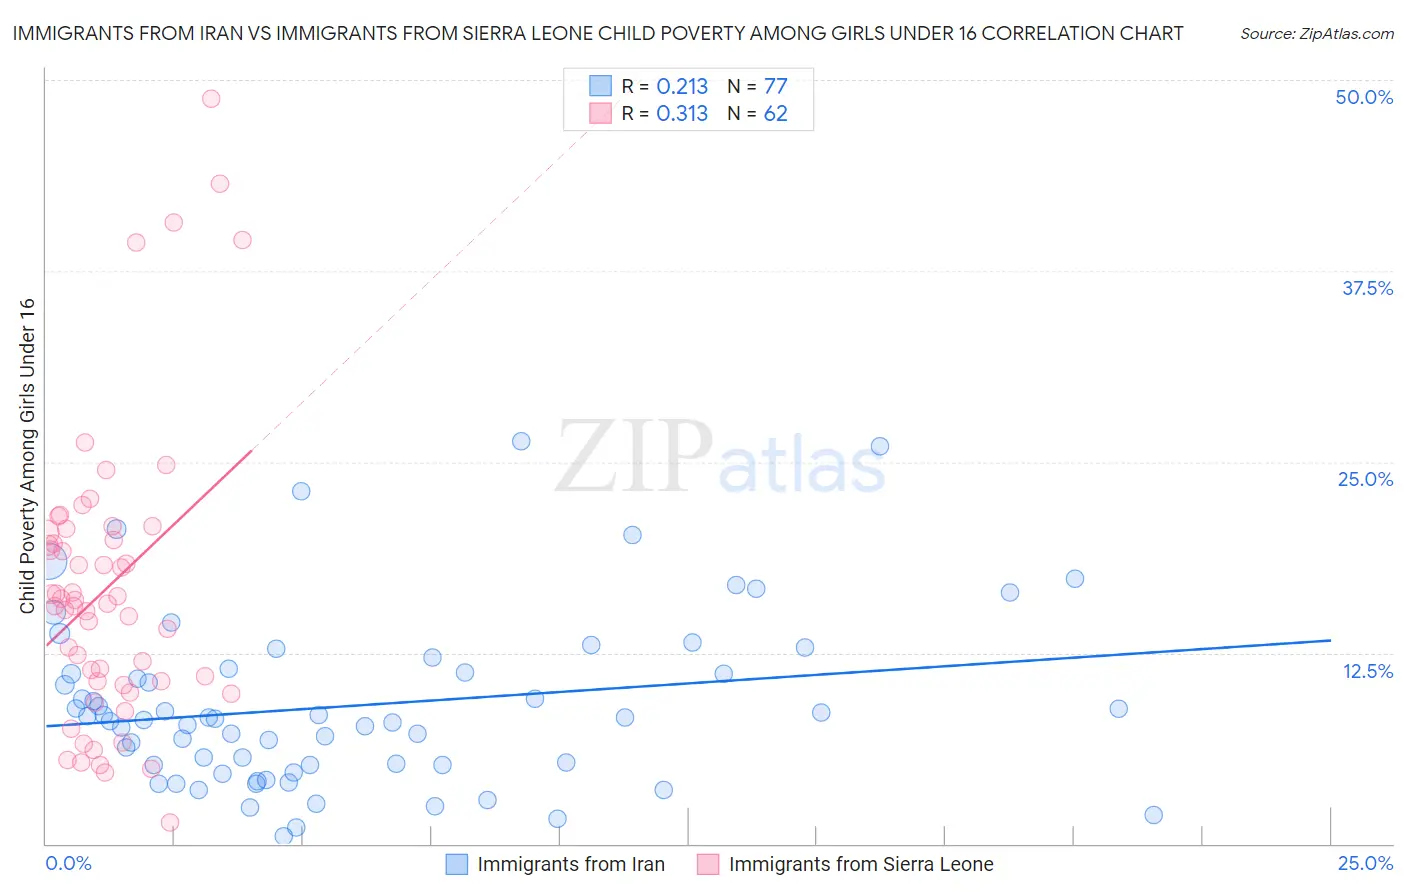 Immigrants from Iran vs Immigrants from Sierra Leone Child Poverty Among Girls Under 16